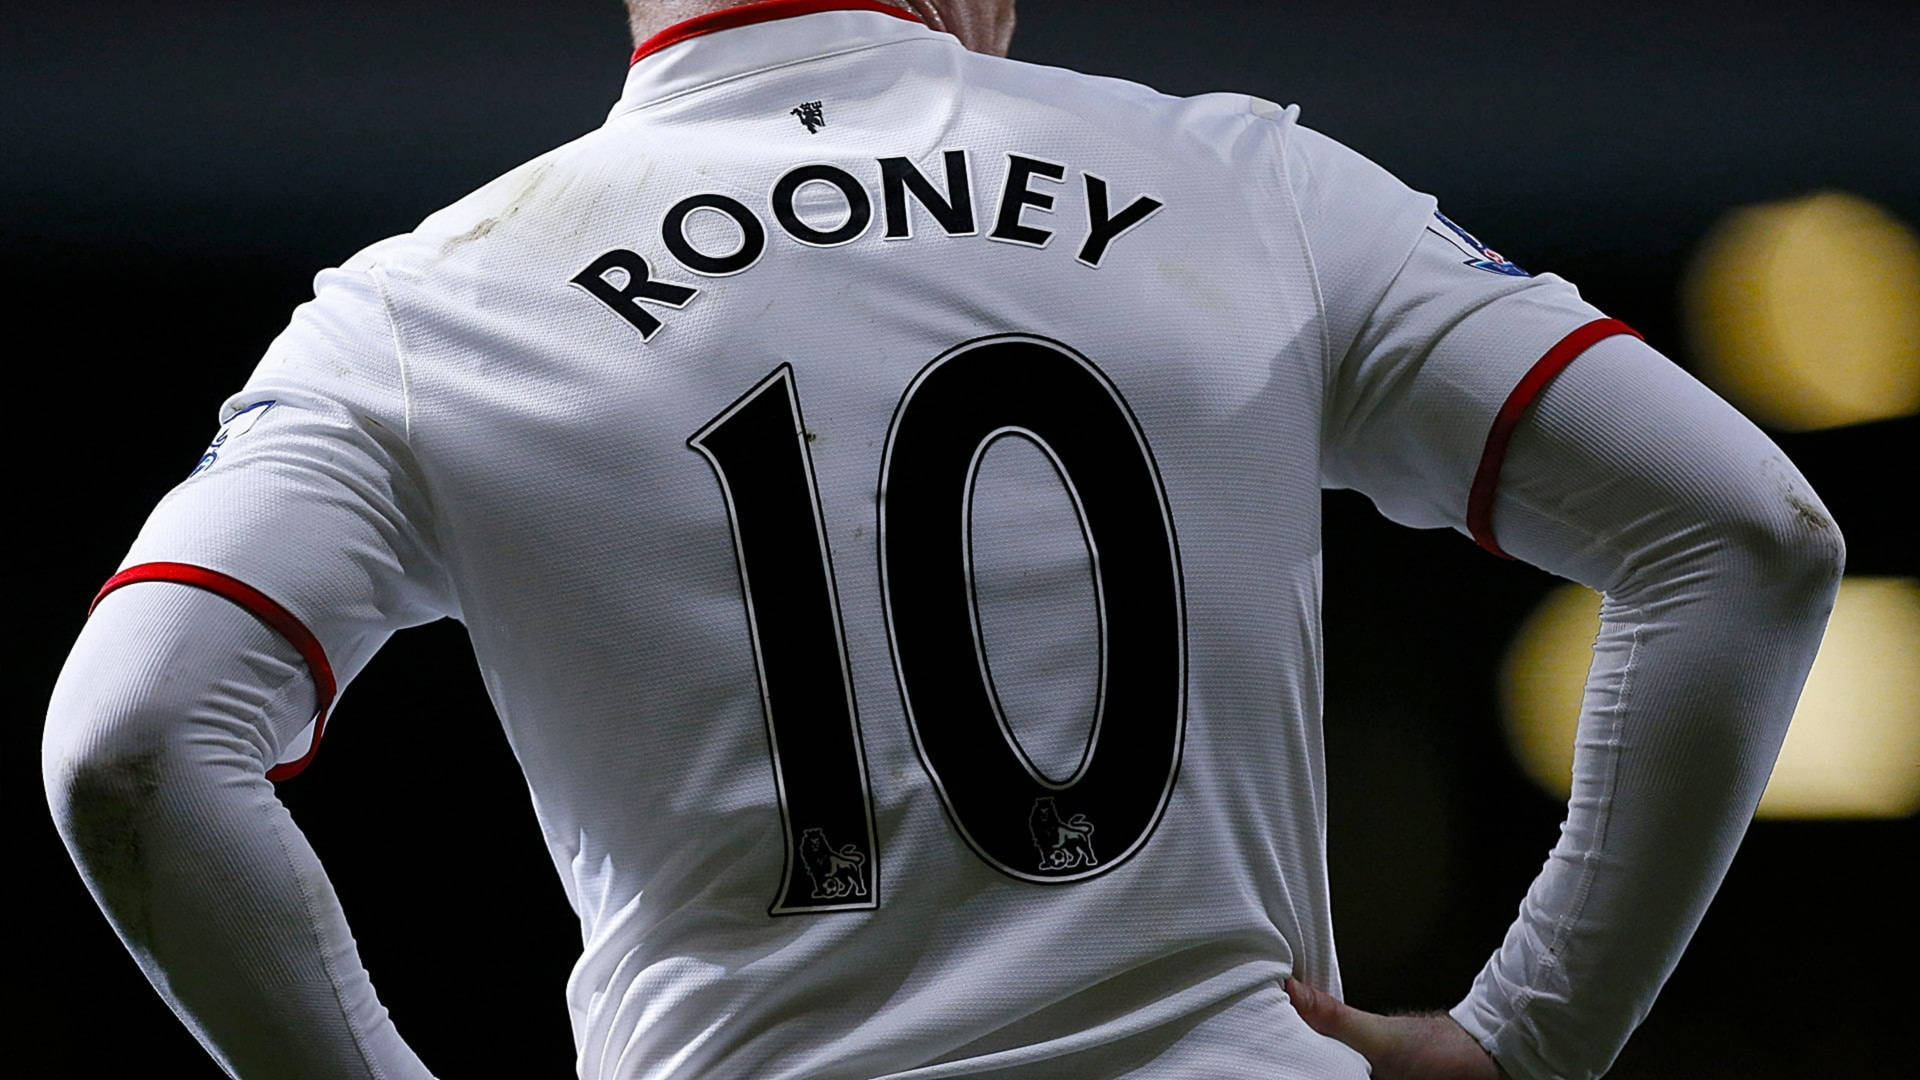 Wayne Rooney Football Jersey Picture